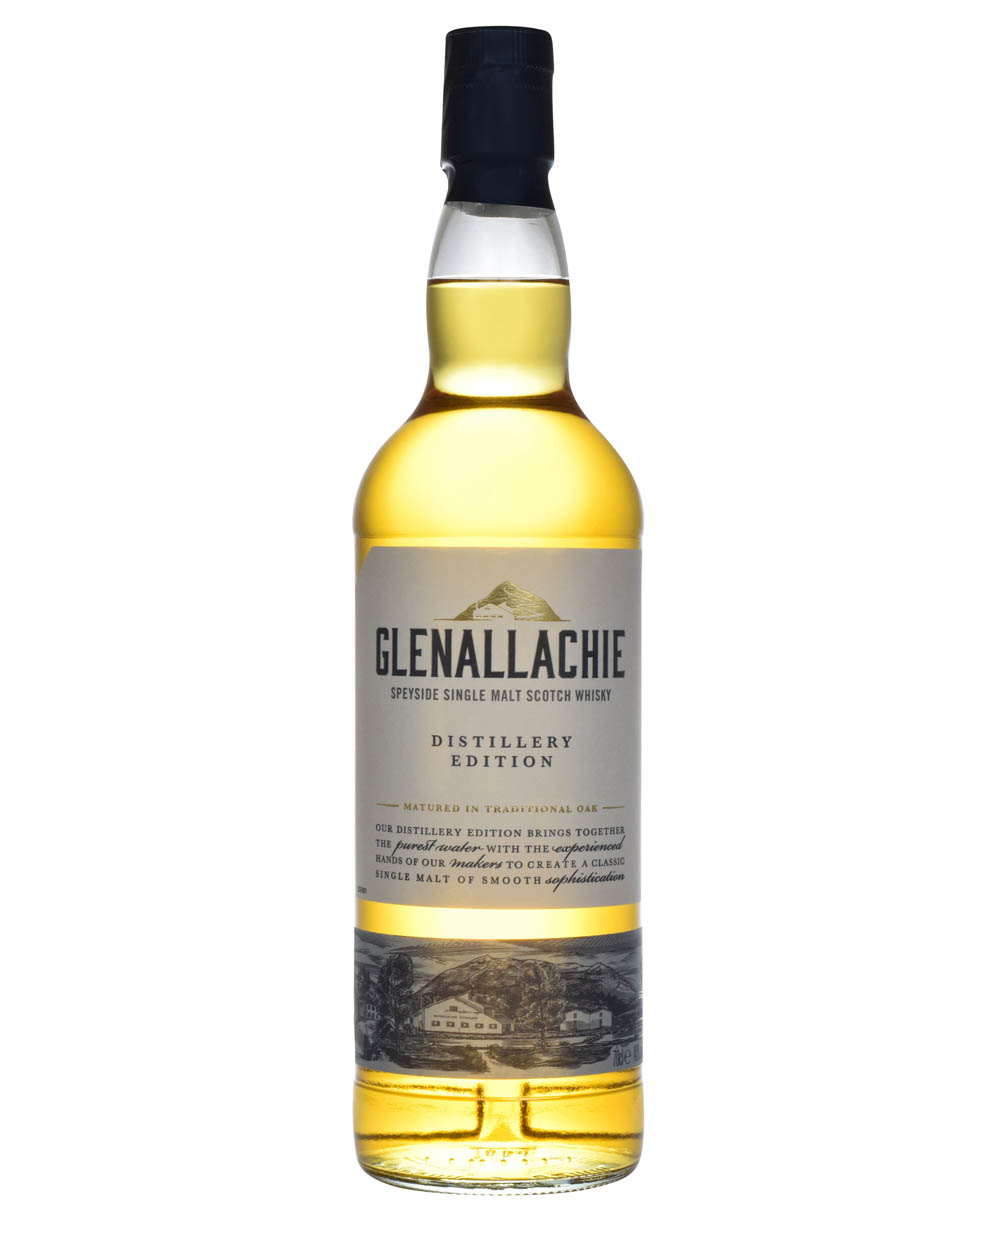 Glenallachie Distillery Edition Musthave Malts MHM